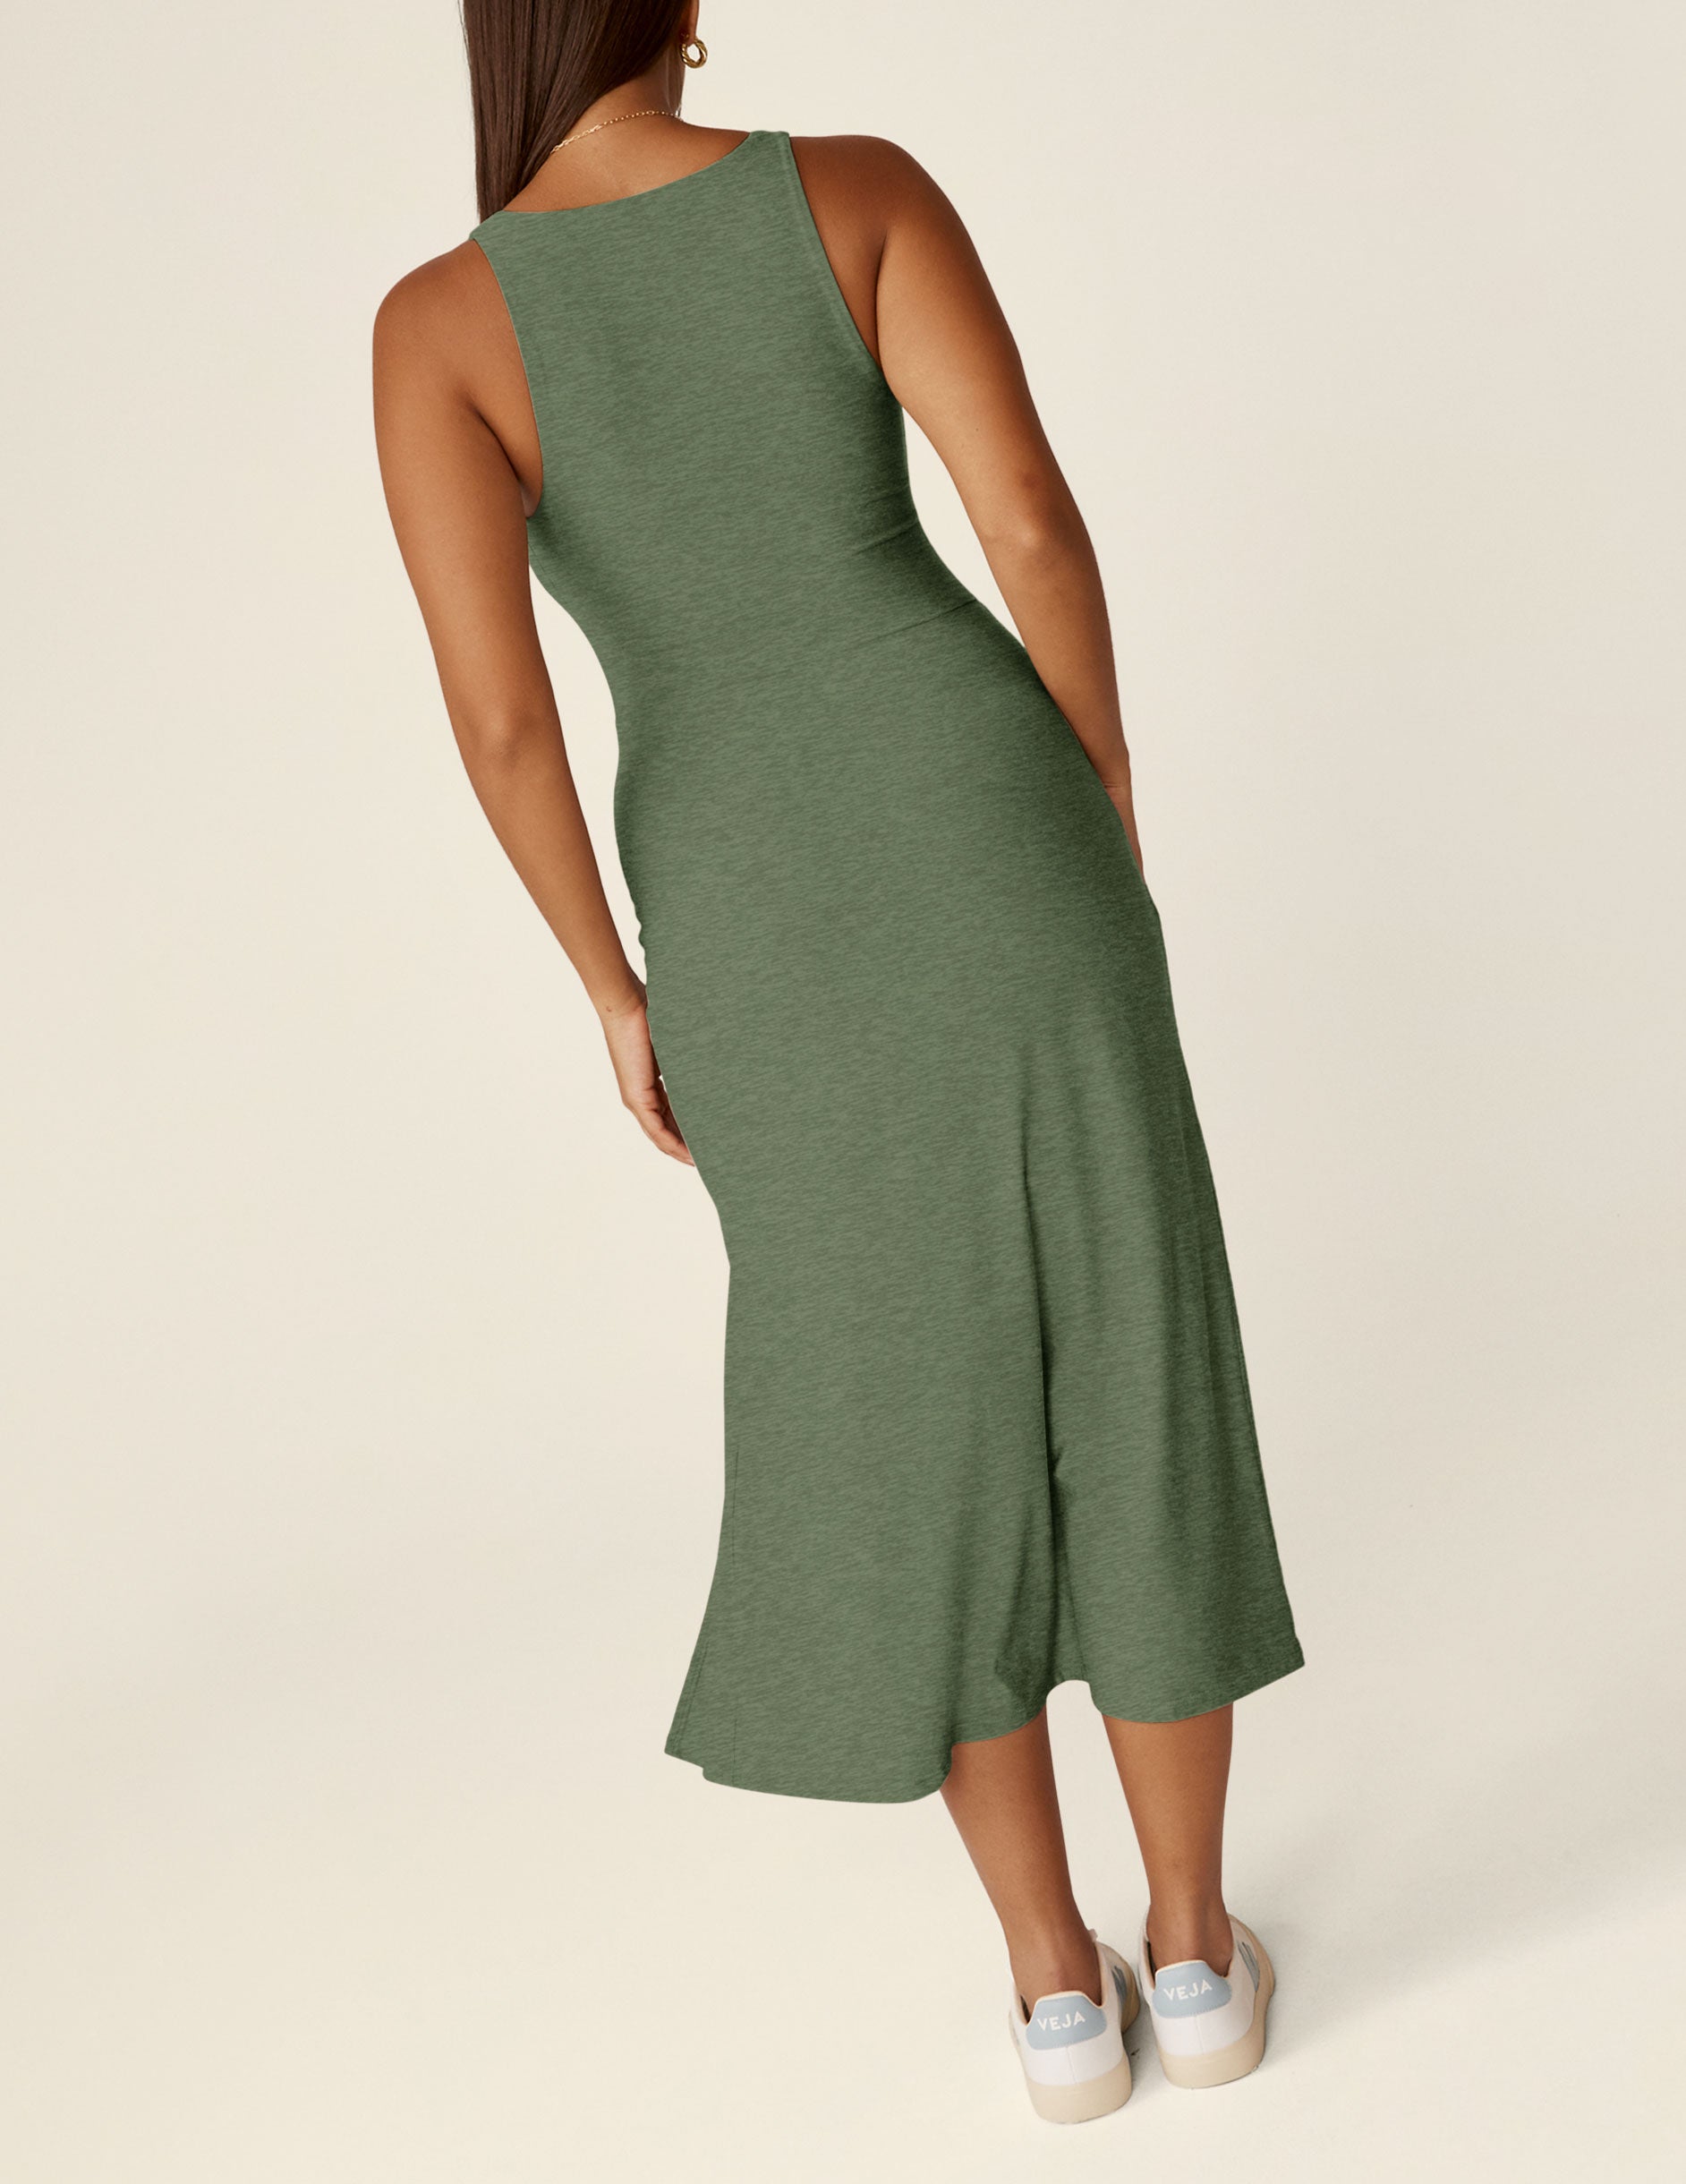 green square neck midi length dress with a front side slit.